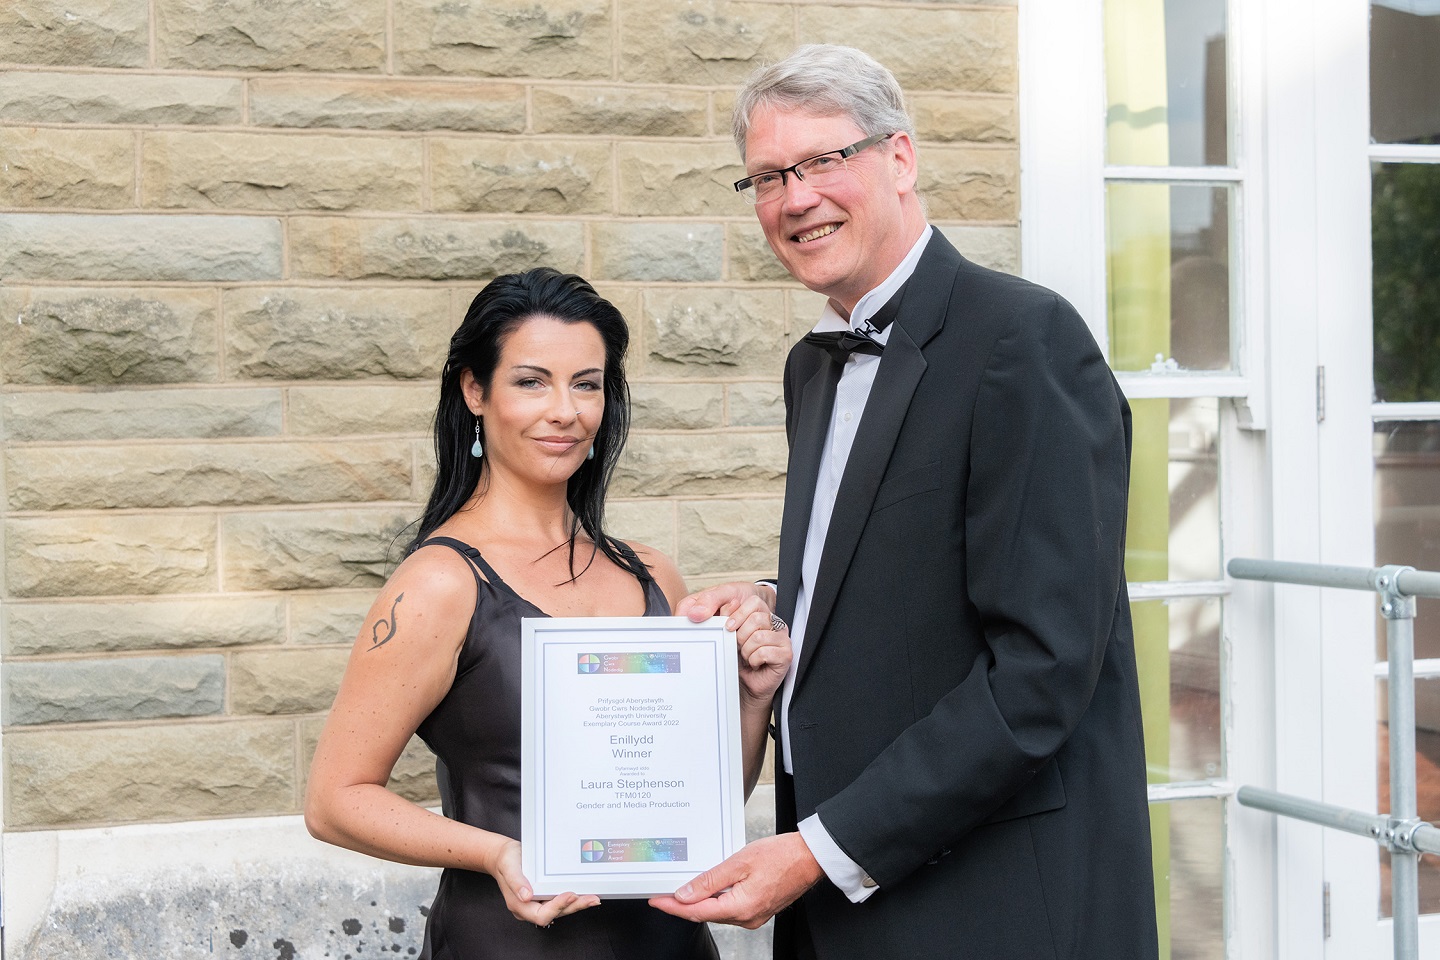 Professor Tim Woods, Pro Vice-Chancellor, Learning, Teaching and Student Experience, presents Dr Laura Stephenson, Department of Theatre, Film and Television Studies, with her Exemplary Course Award 2021/22.